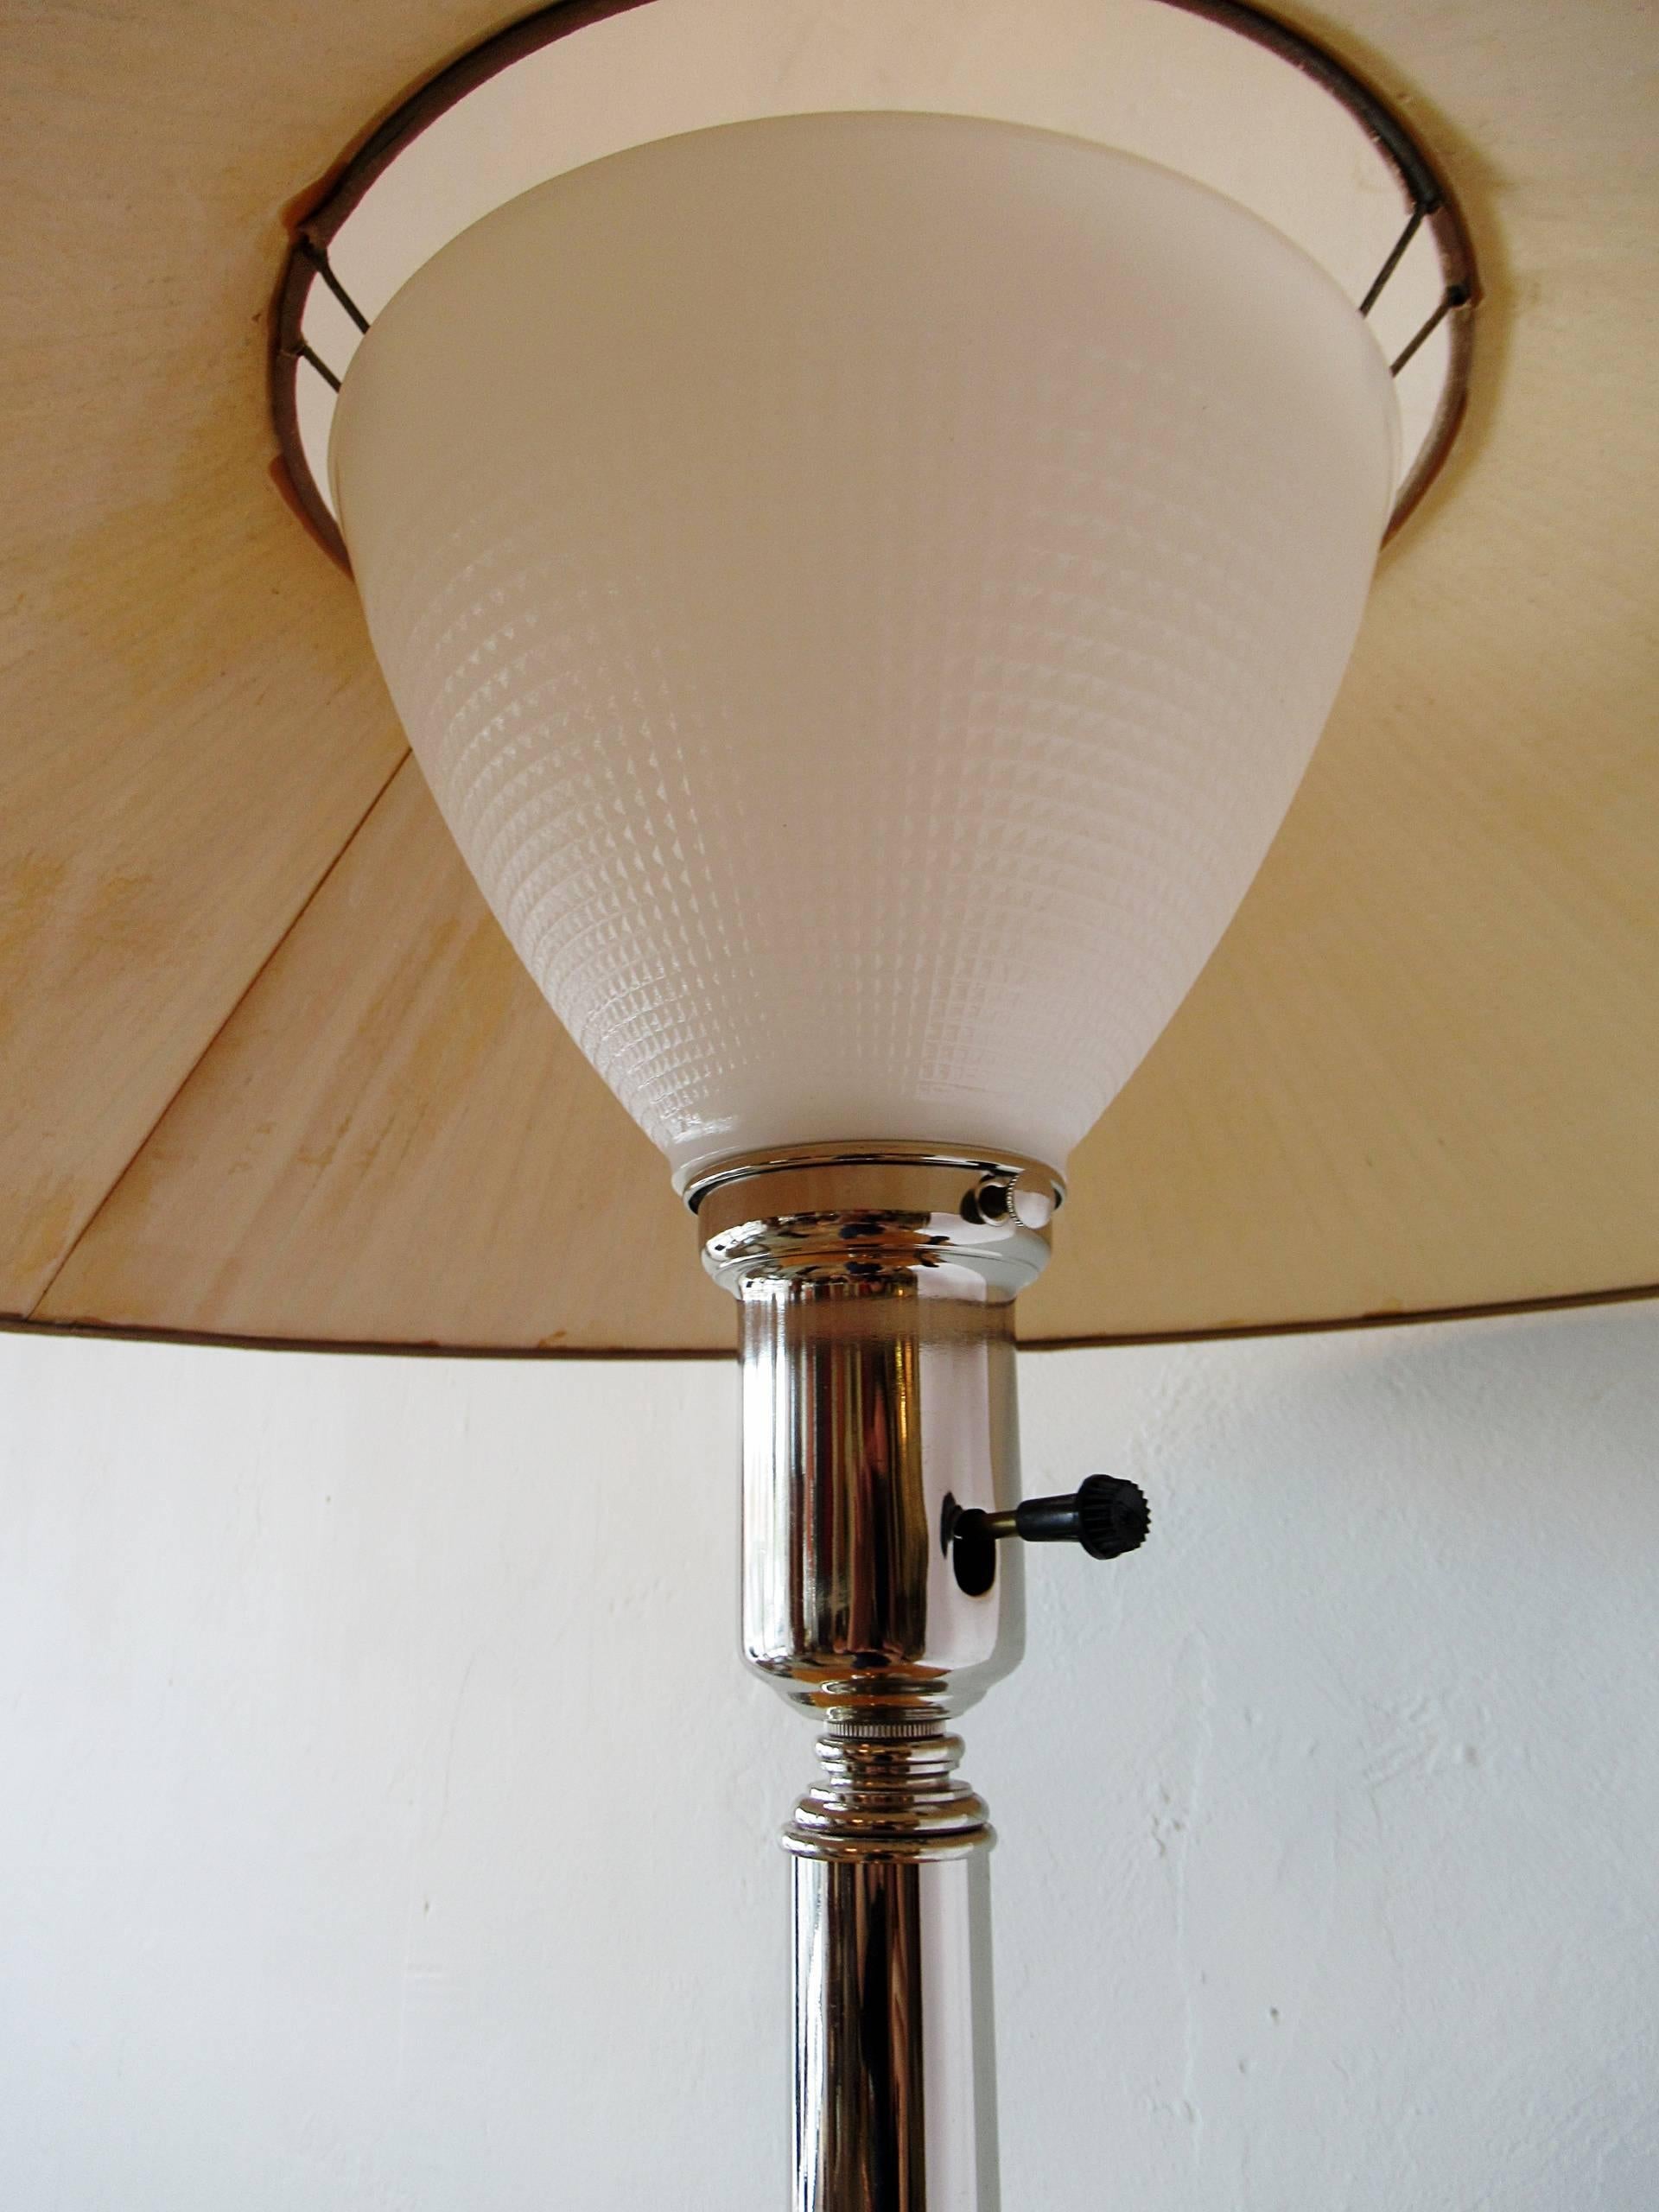 Mid-20th Century American Modern Chrome Table Lamps, Viktor Schreckengost, 1930s For Sale